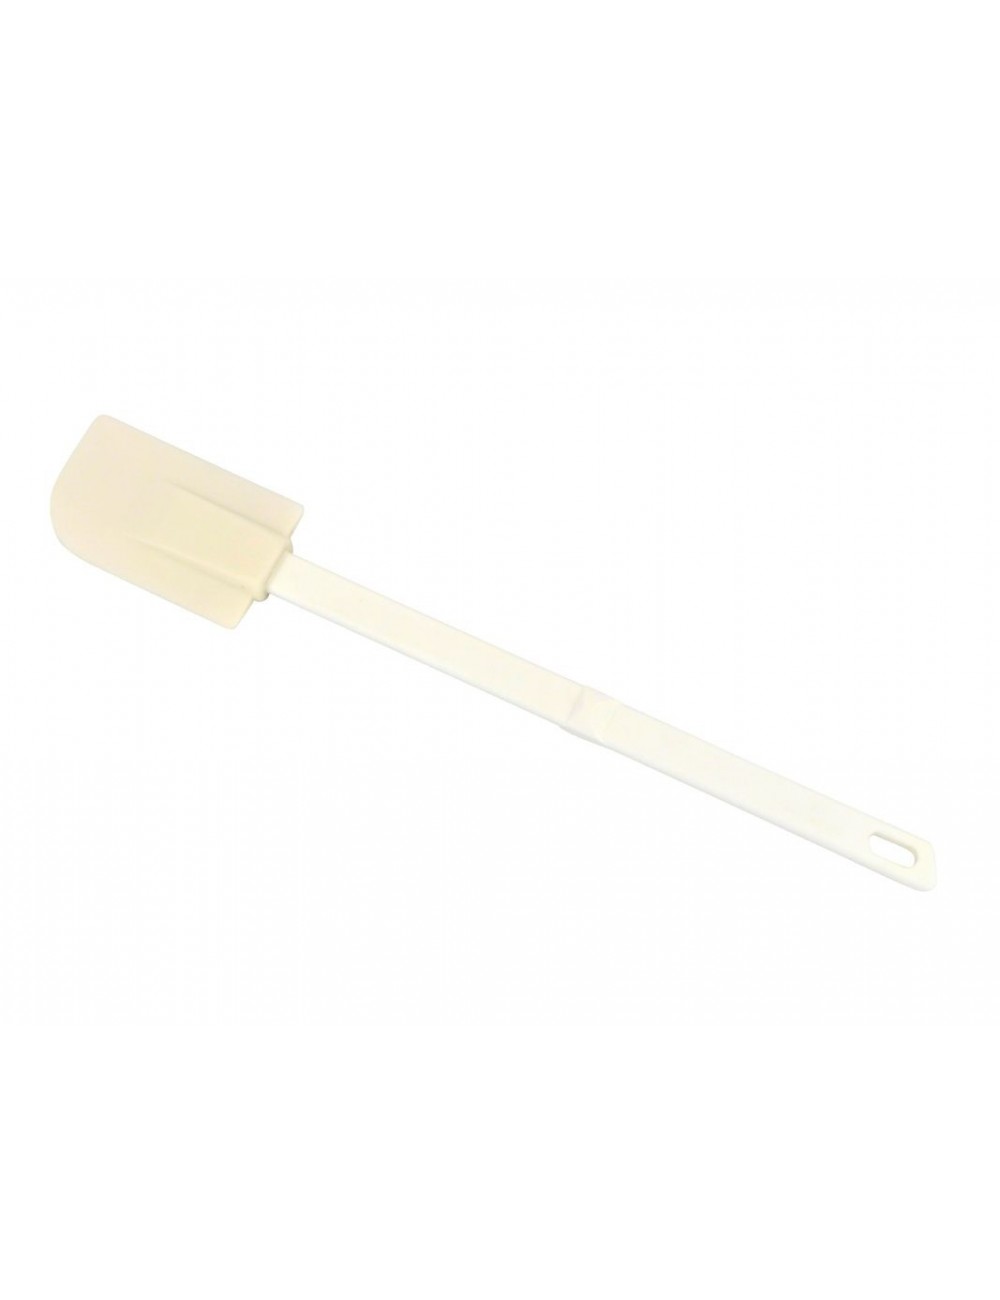 RUBER SPATULA WITH COMPOSITE HANDLE